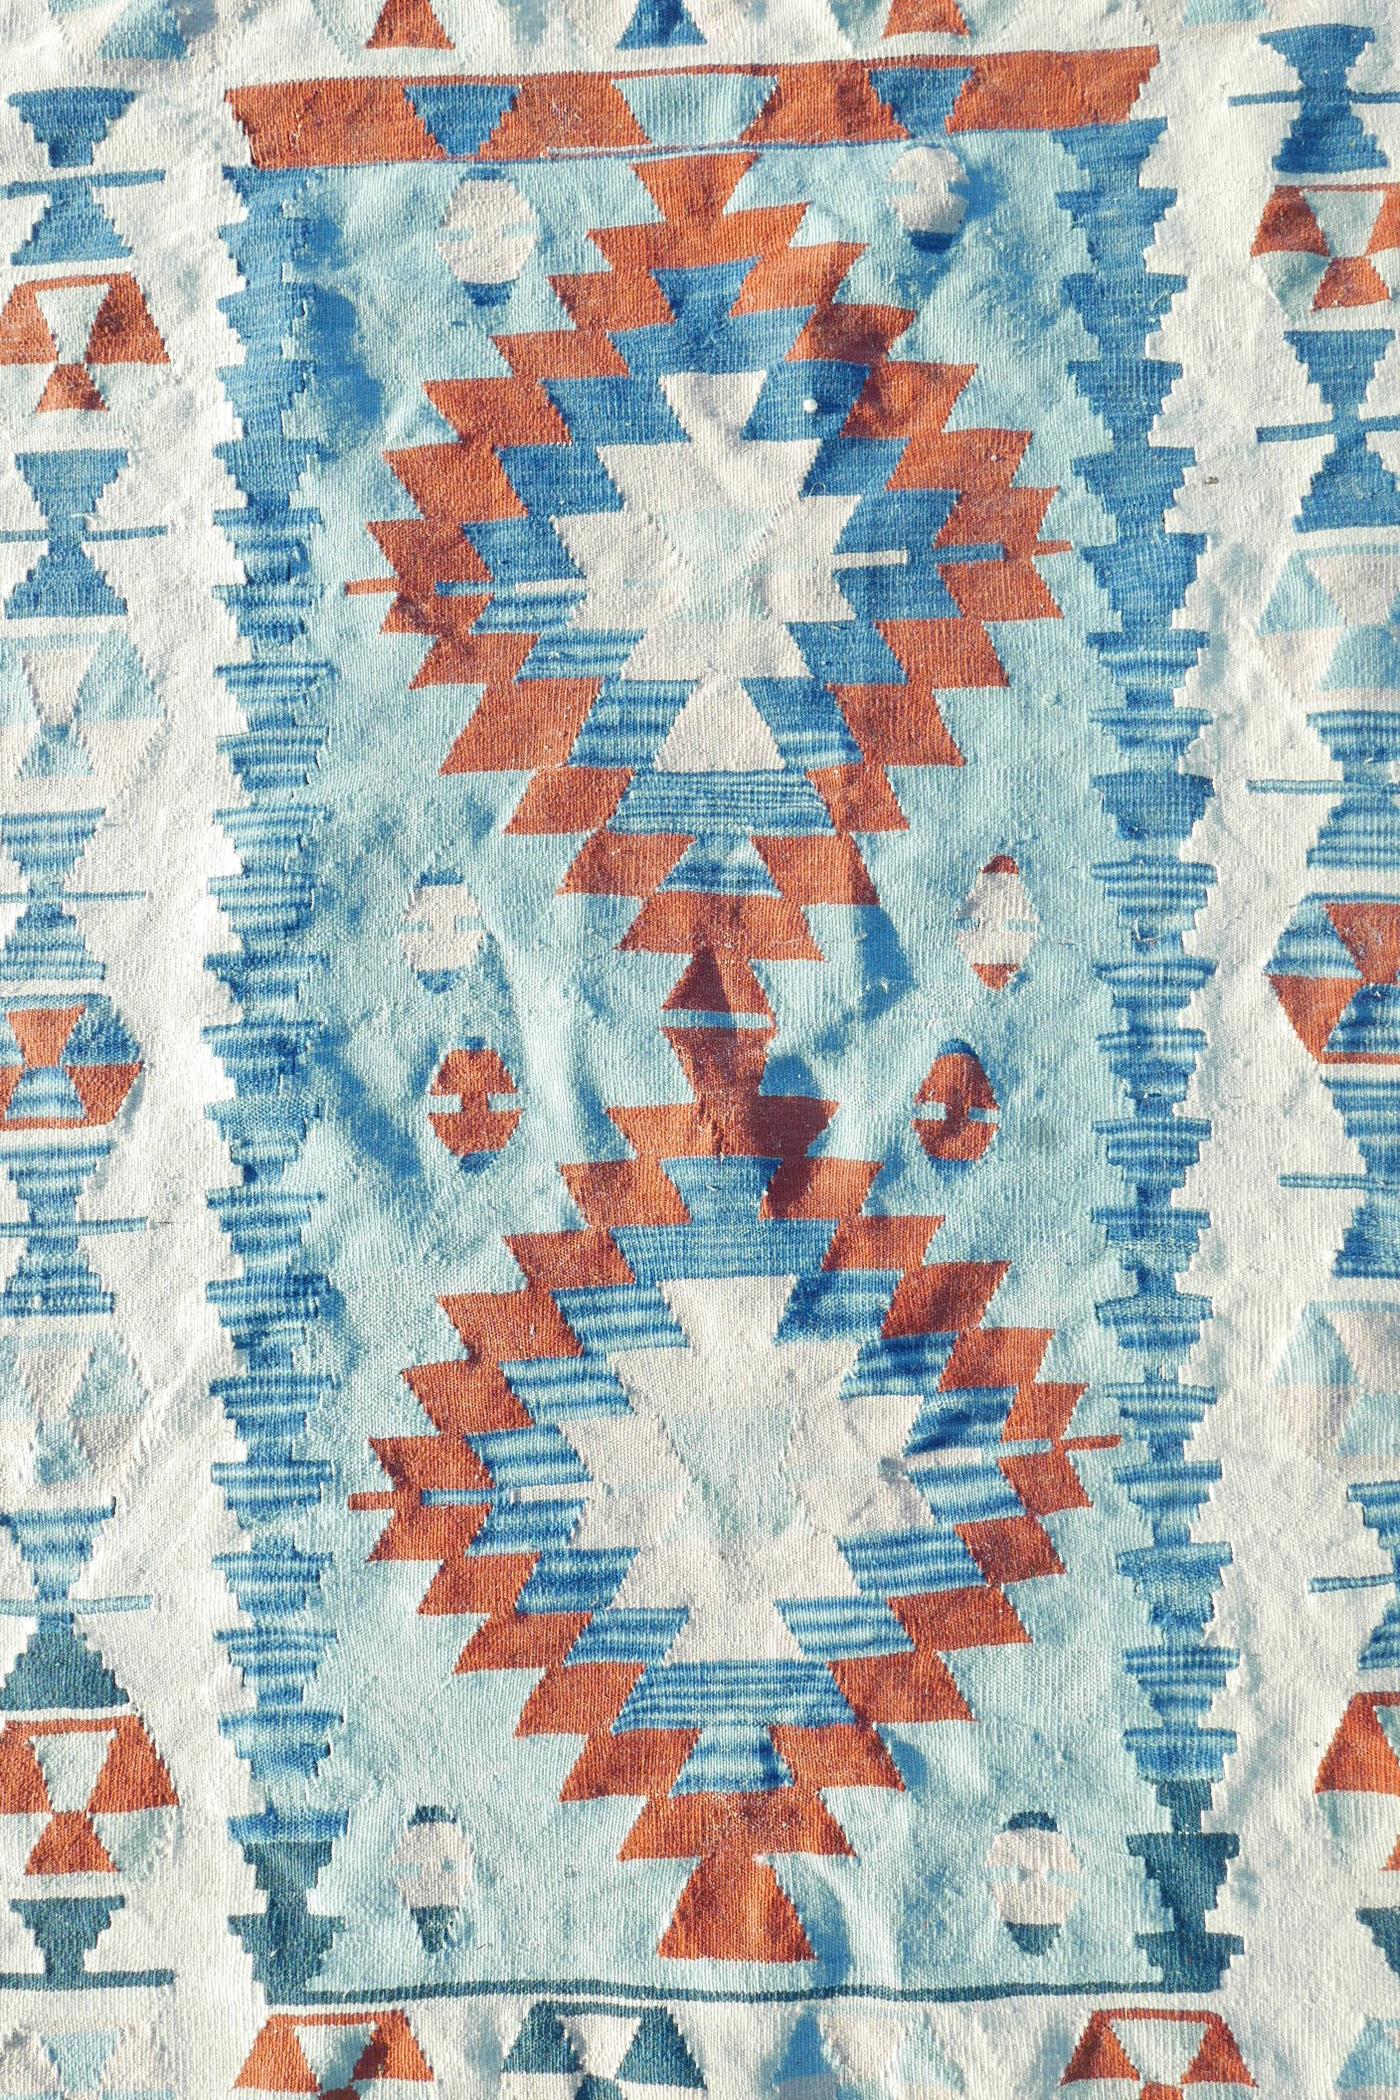 A Swedish blue ground rug decorated with geometric twin medallion design, 41" x 62" - Image 2 of 4